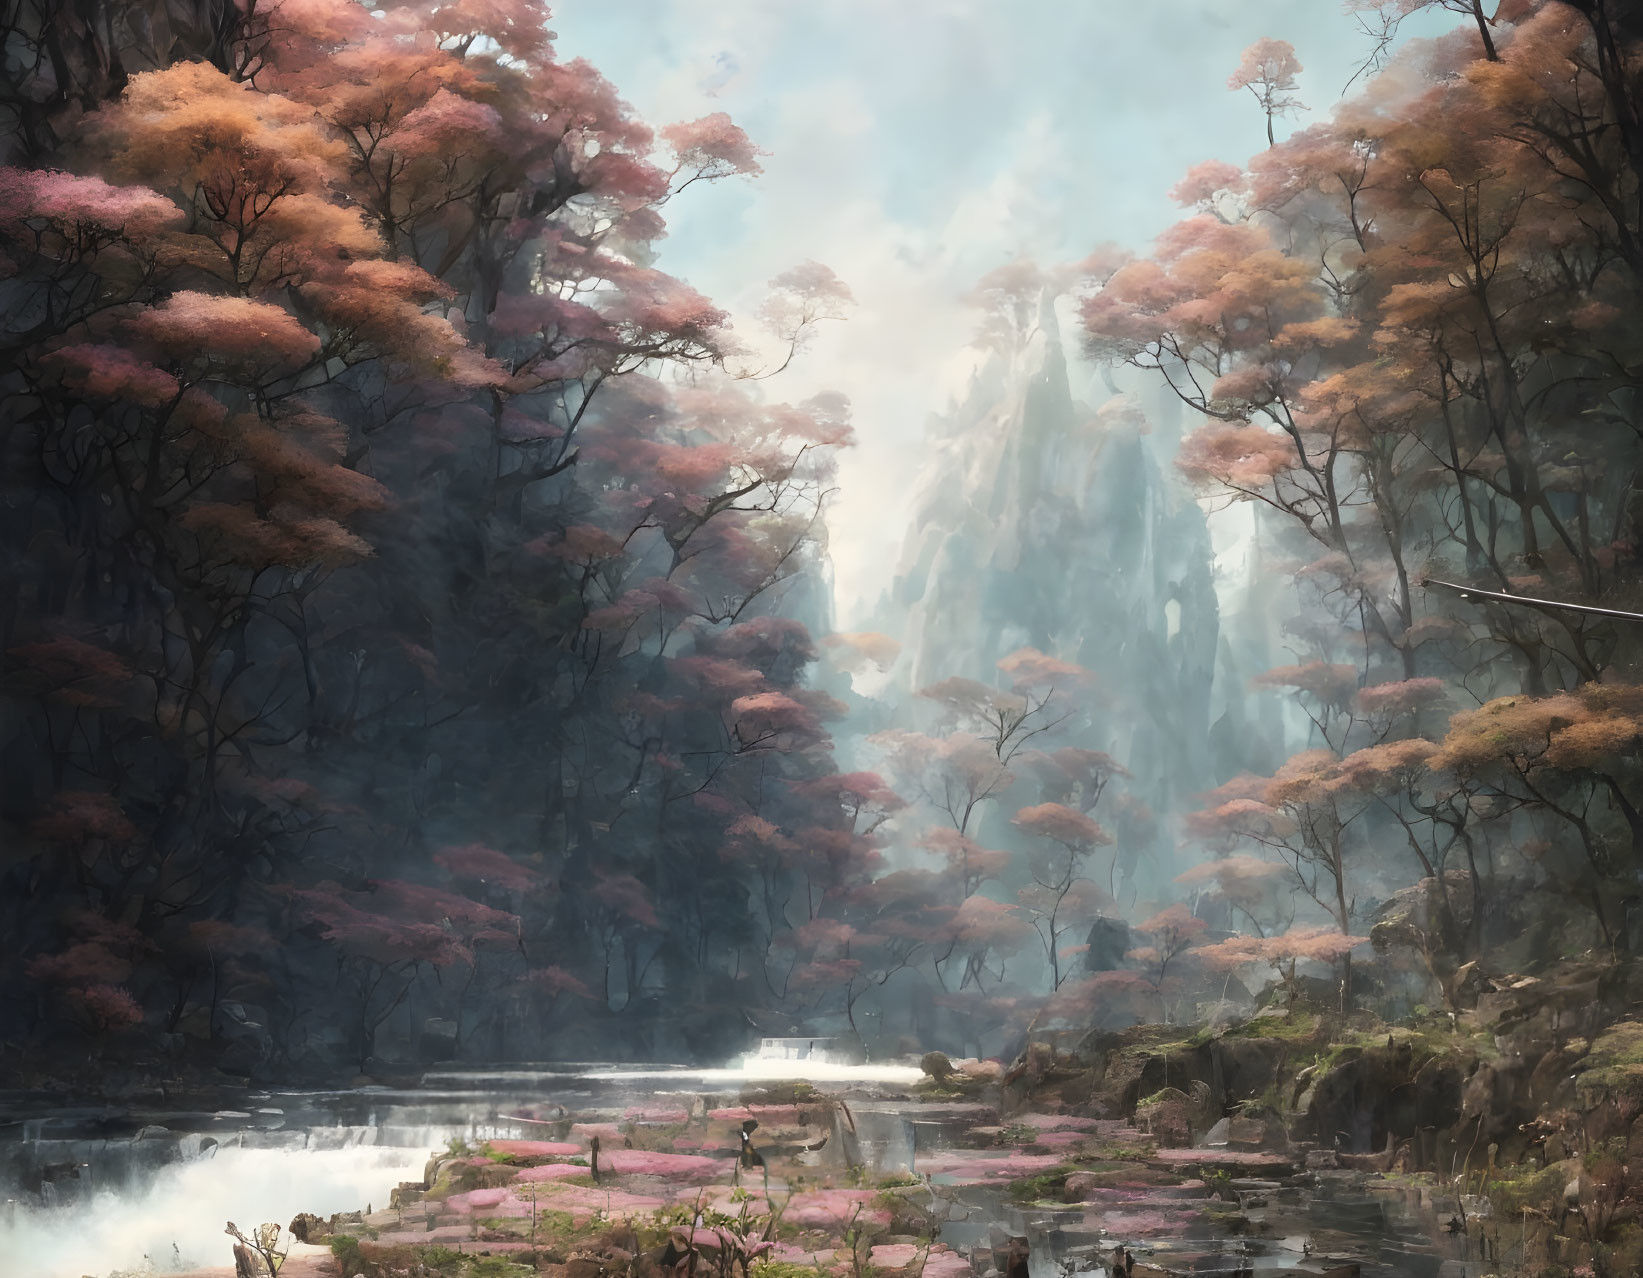 Pink Foliage and Serene River in Mystical Forest Landscape